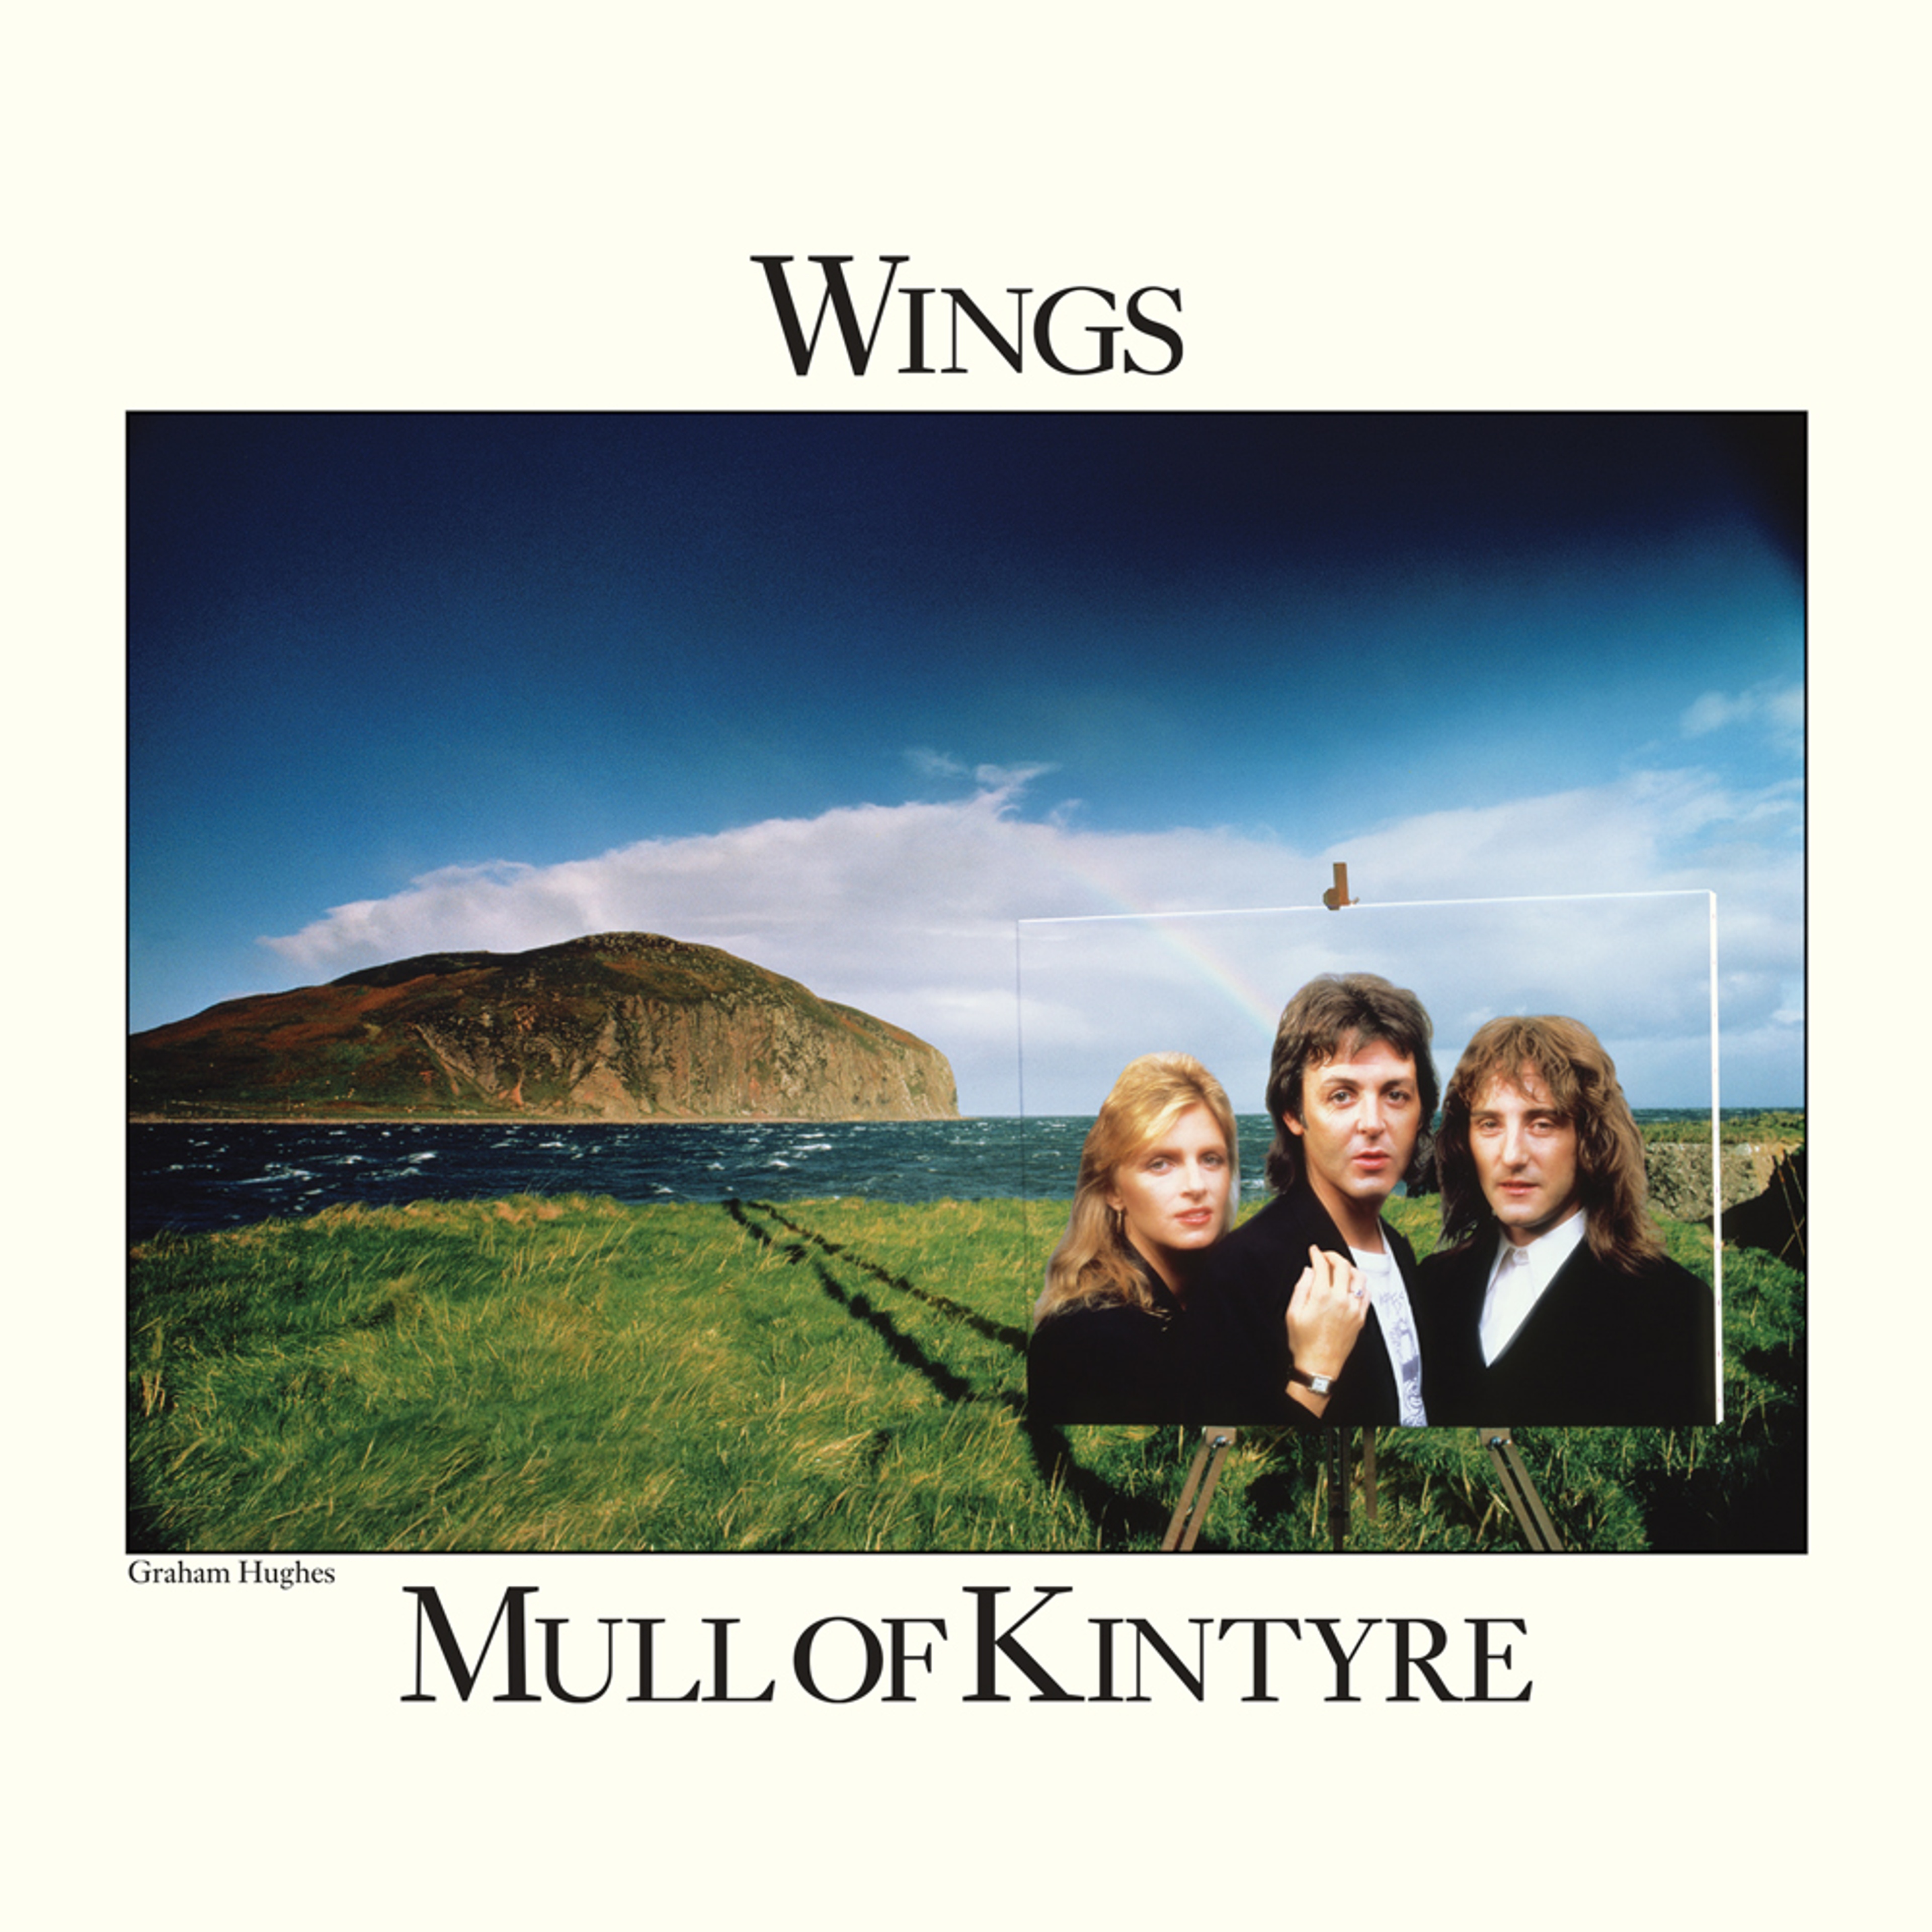 “Mull of Kintyre” Single artwork as featured in 'The 7" Singles Box'